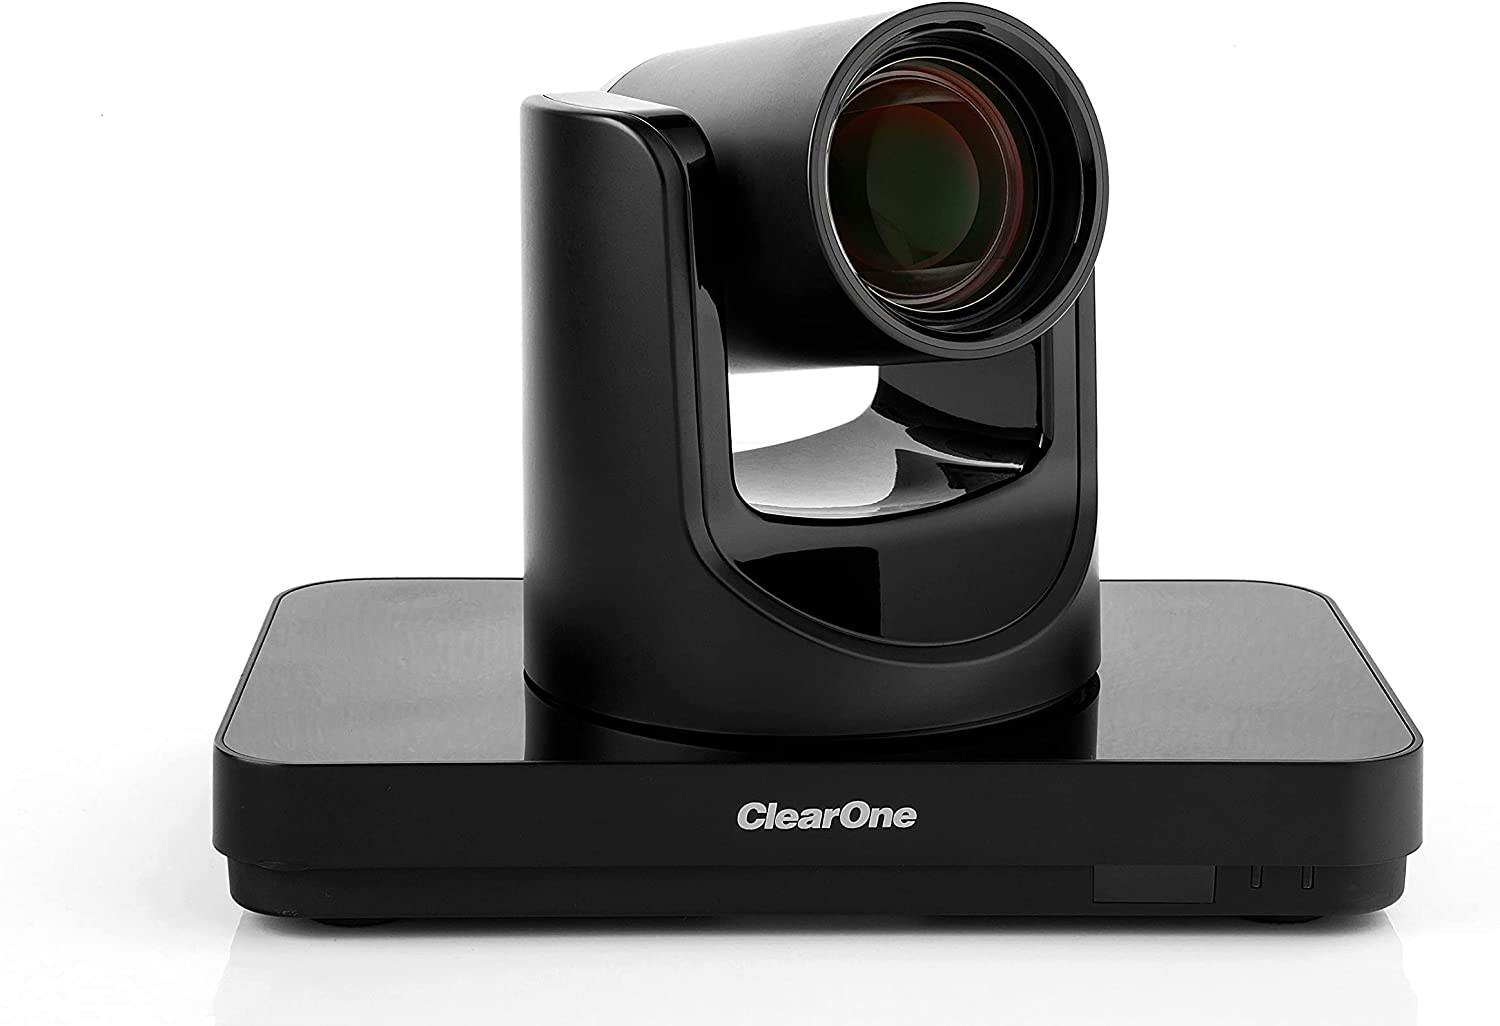 ClearOne Unite 200 Best-in-Class Professional-Grade PTZ Camera. Full HD, 12x Optical Zoom and Wide-Angle Video Capture with Advanced Noise Reduction.